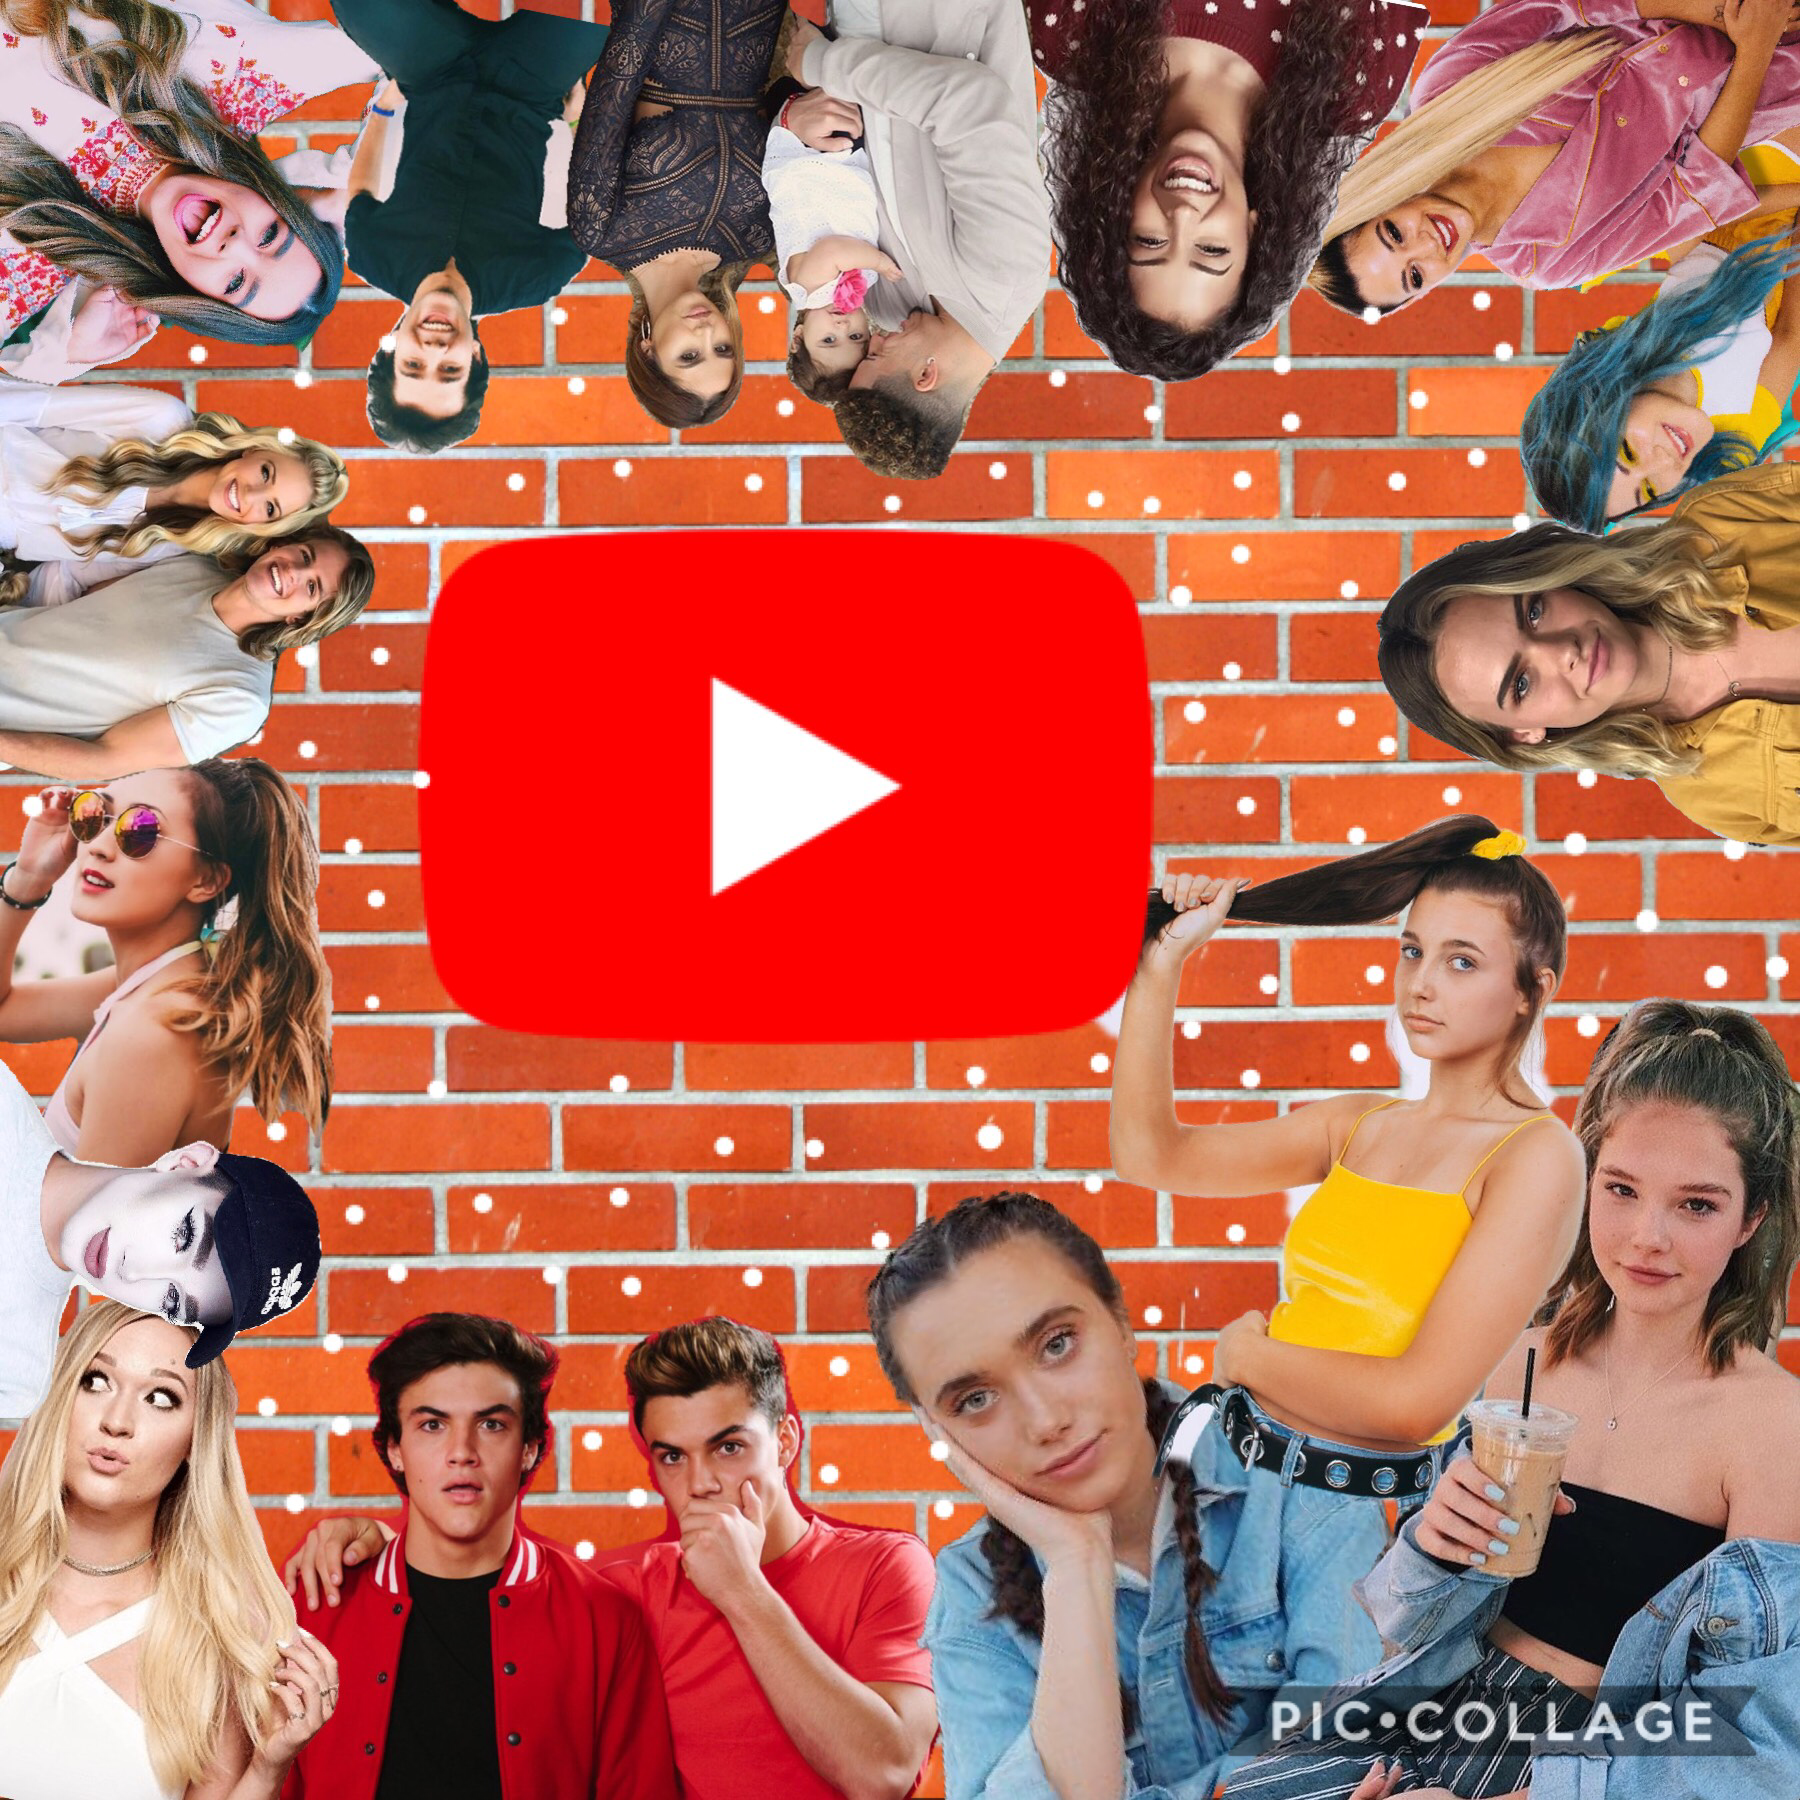 Who’s your favorite youtuber?